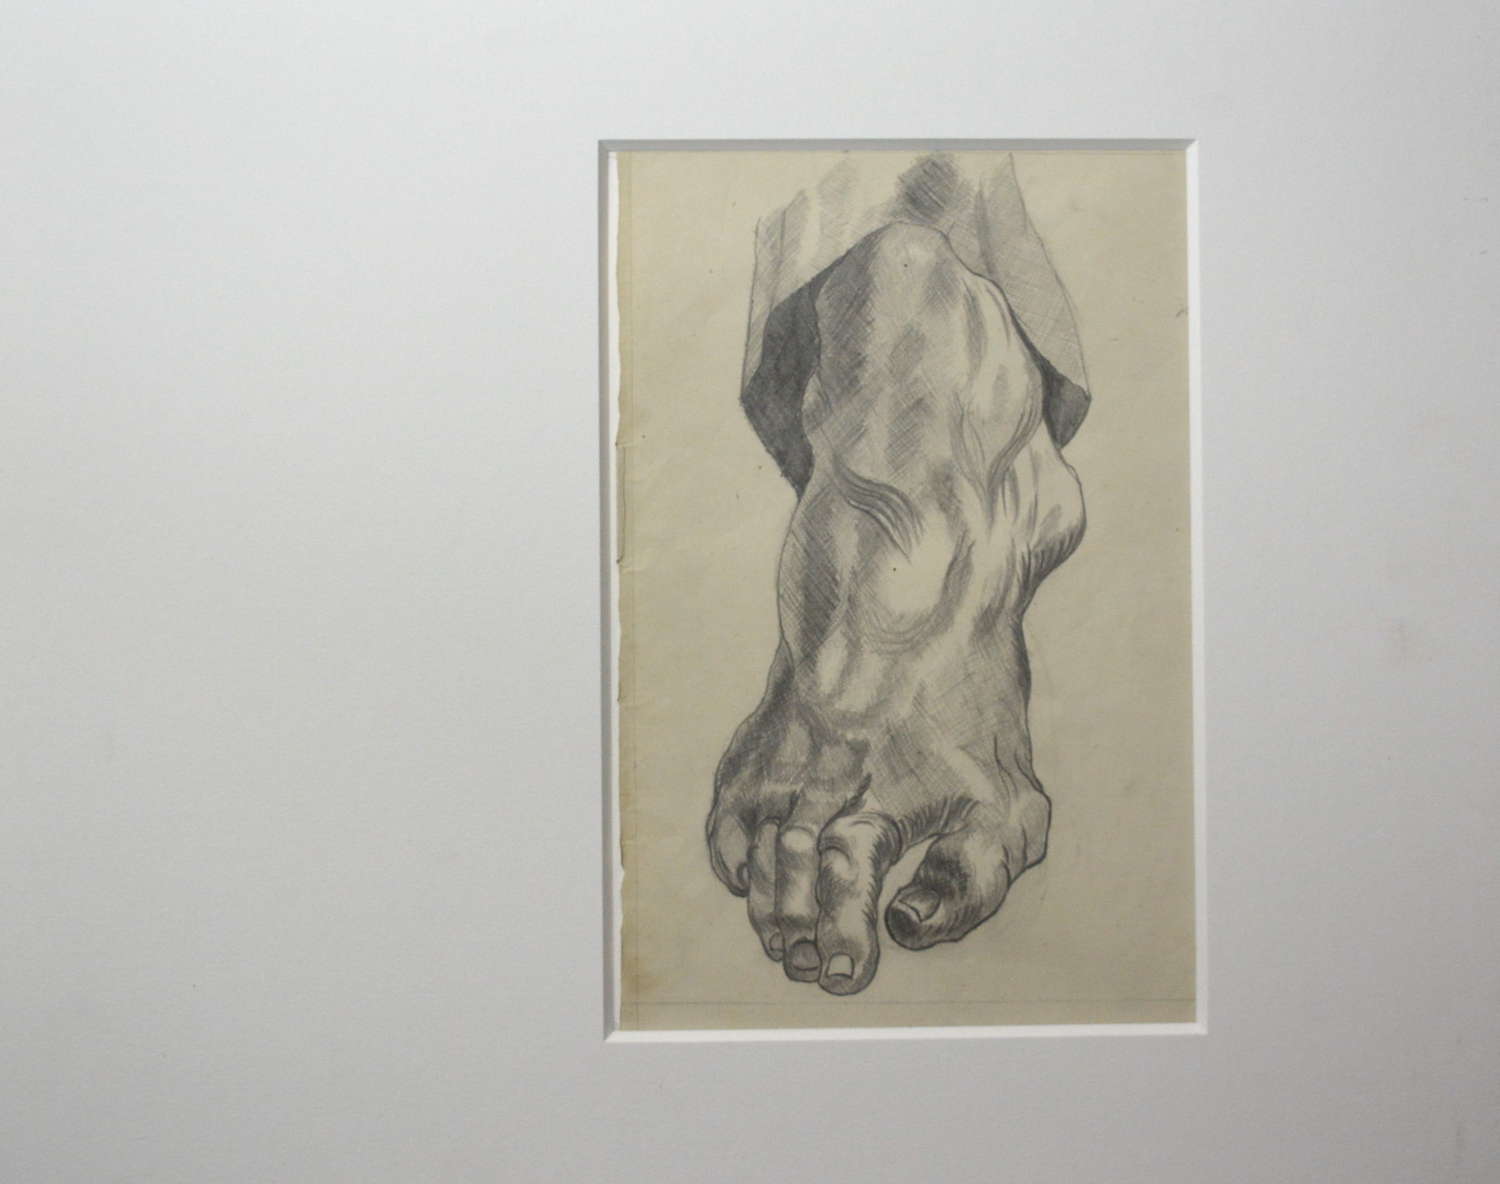 LATE 19TH CENTURY STUDY OF A FOOT